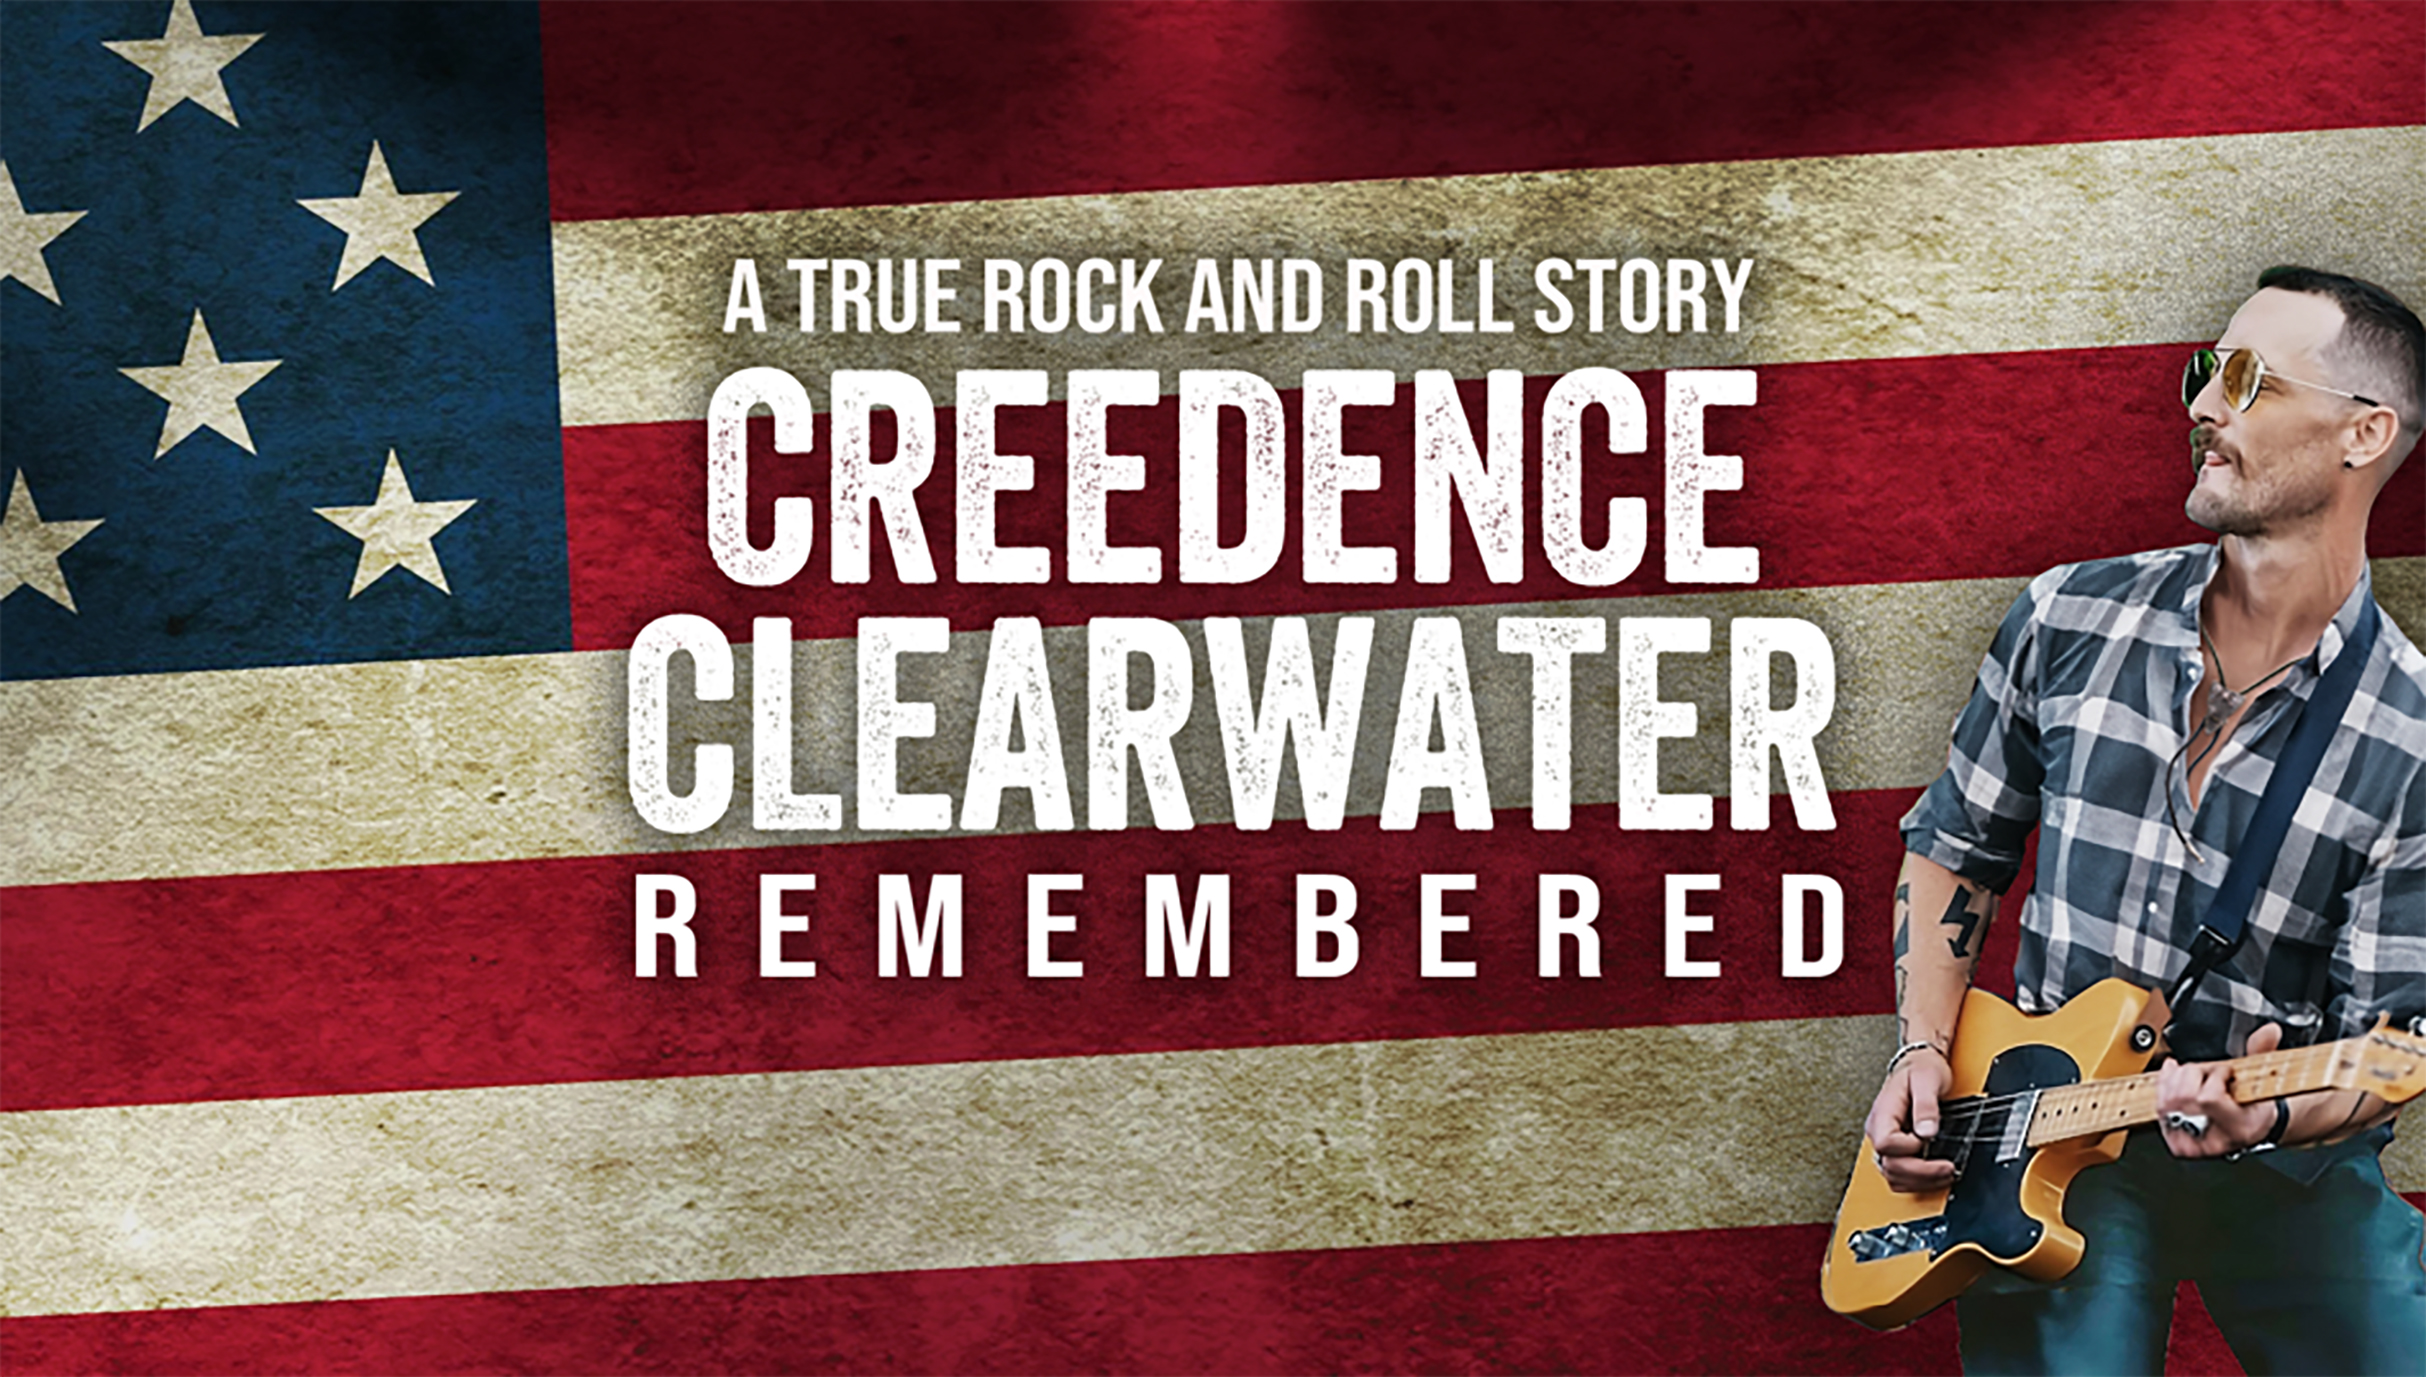 Credence Clearwater Remembered - A True Rock and Roll Story